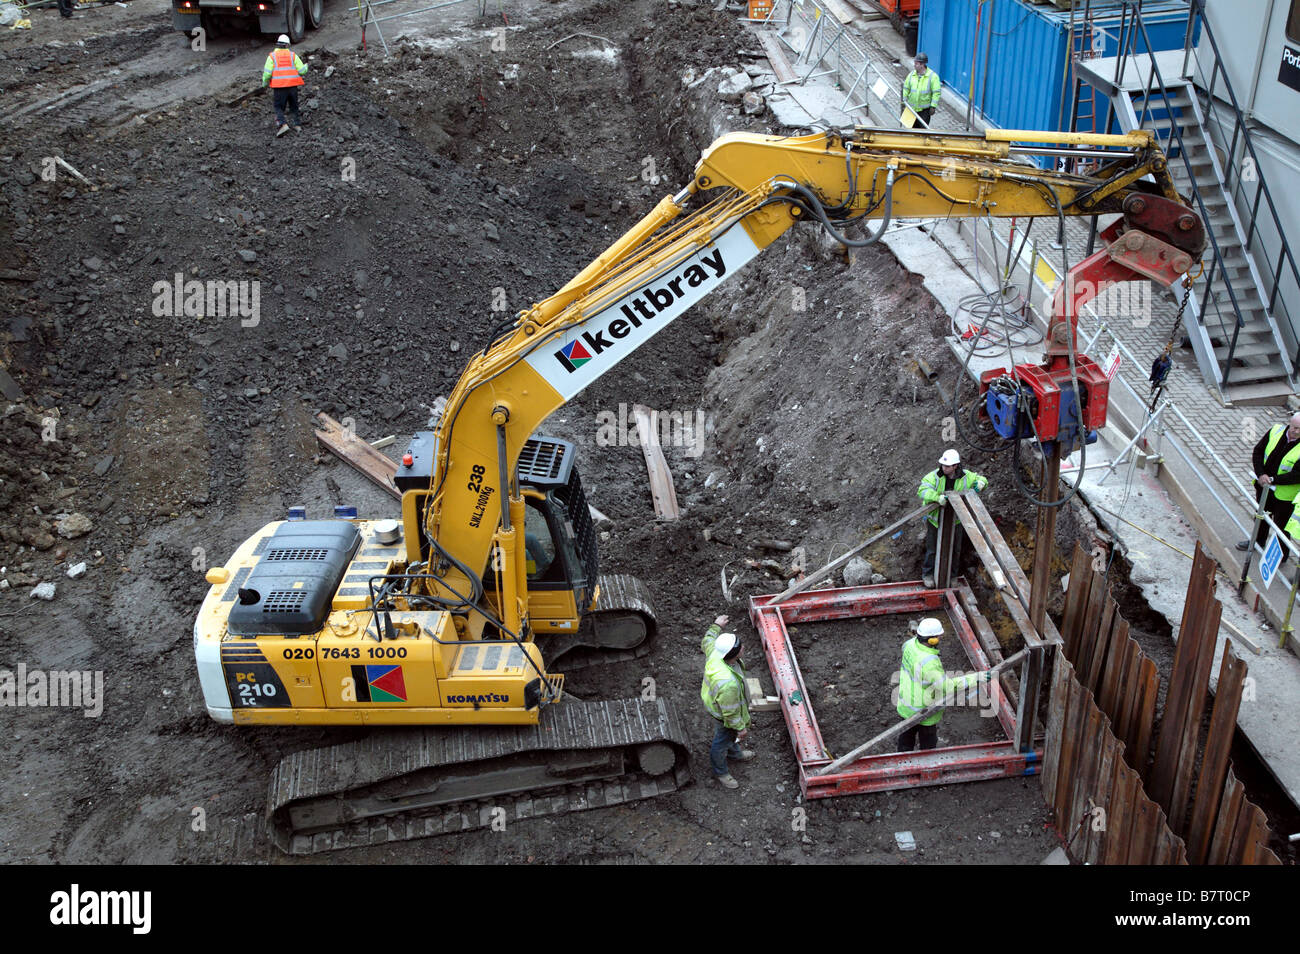 Workman using a vibratory pile driver attached to an excavator to drive in steel piles for  temporary foundation shoring Stock Photo